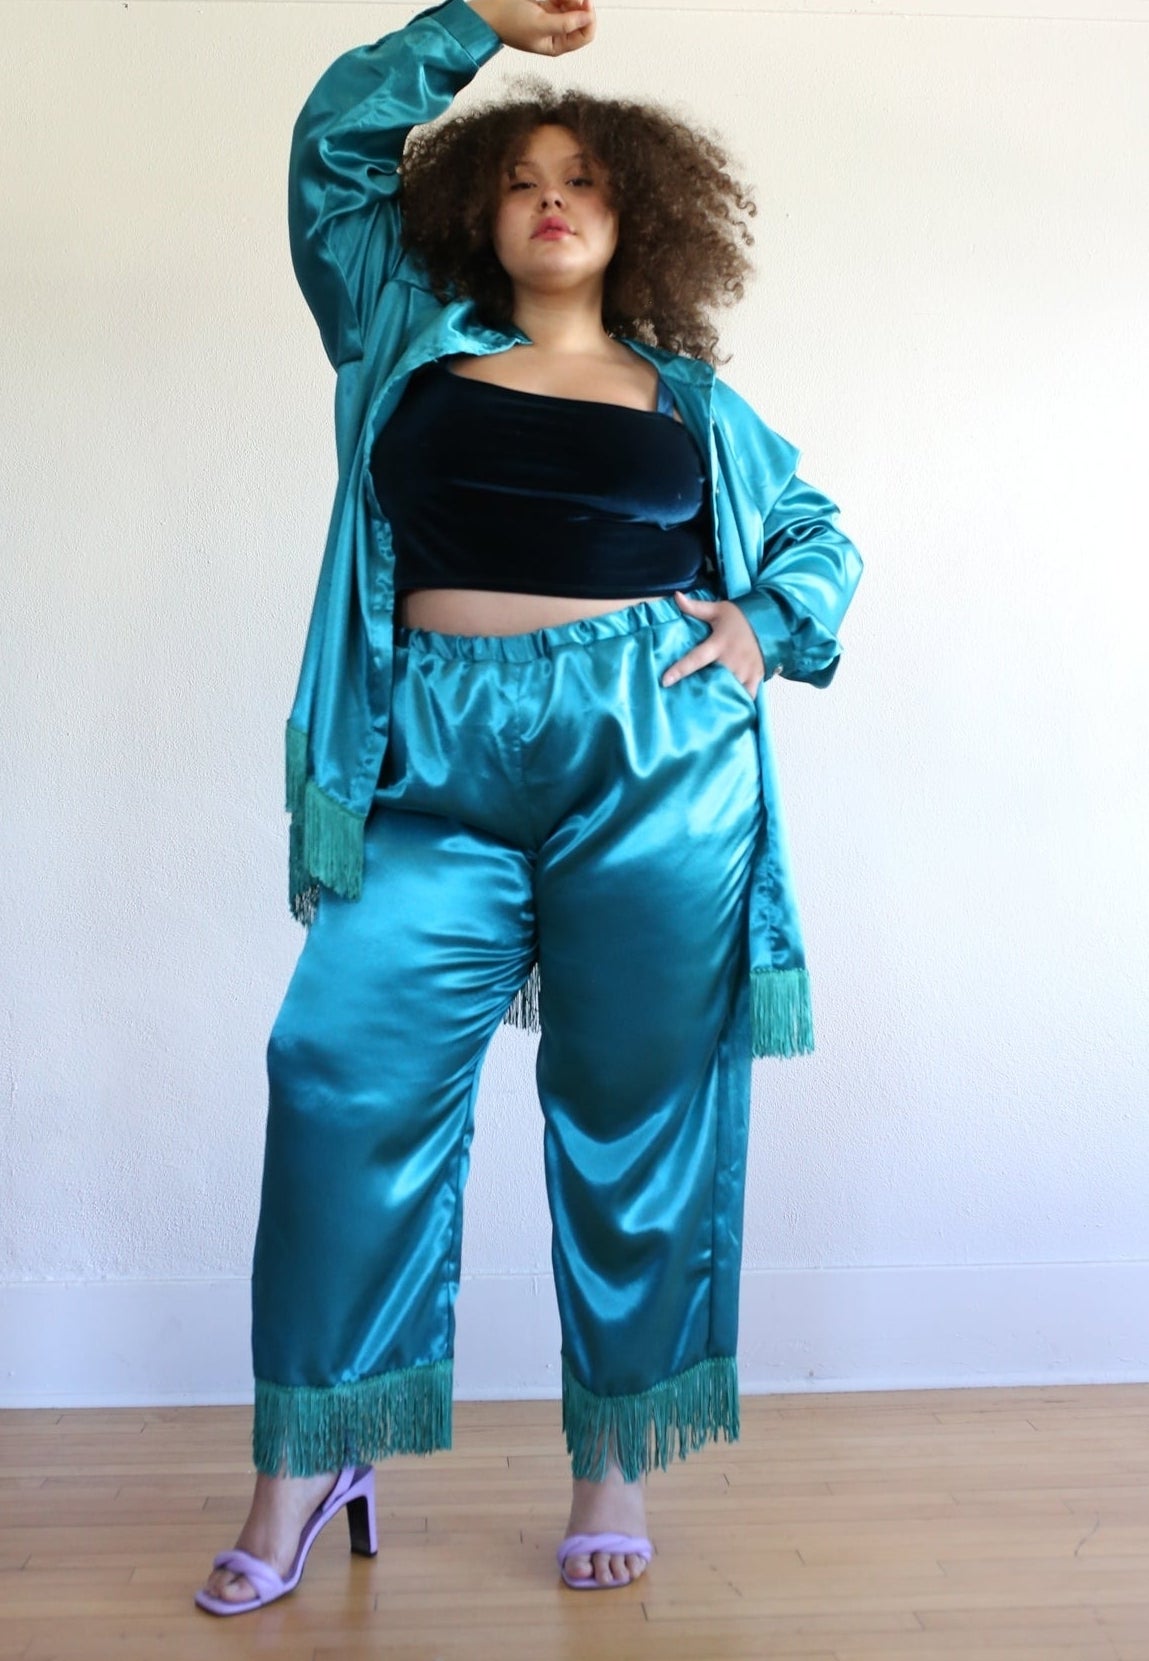 A model posing in teal pants with fringe